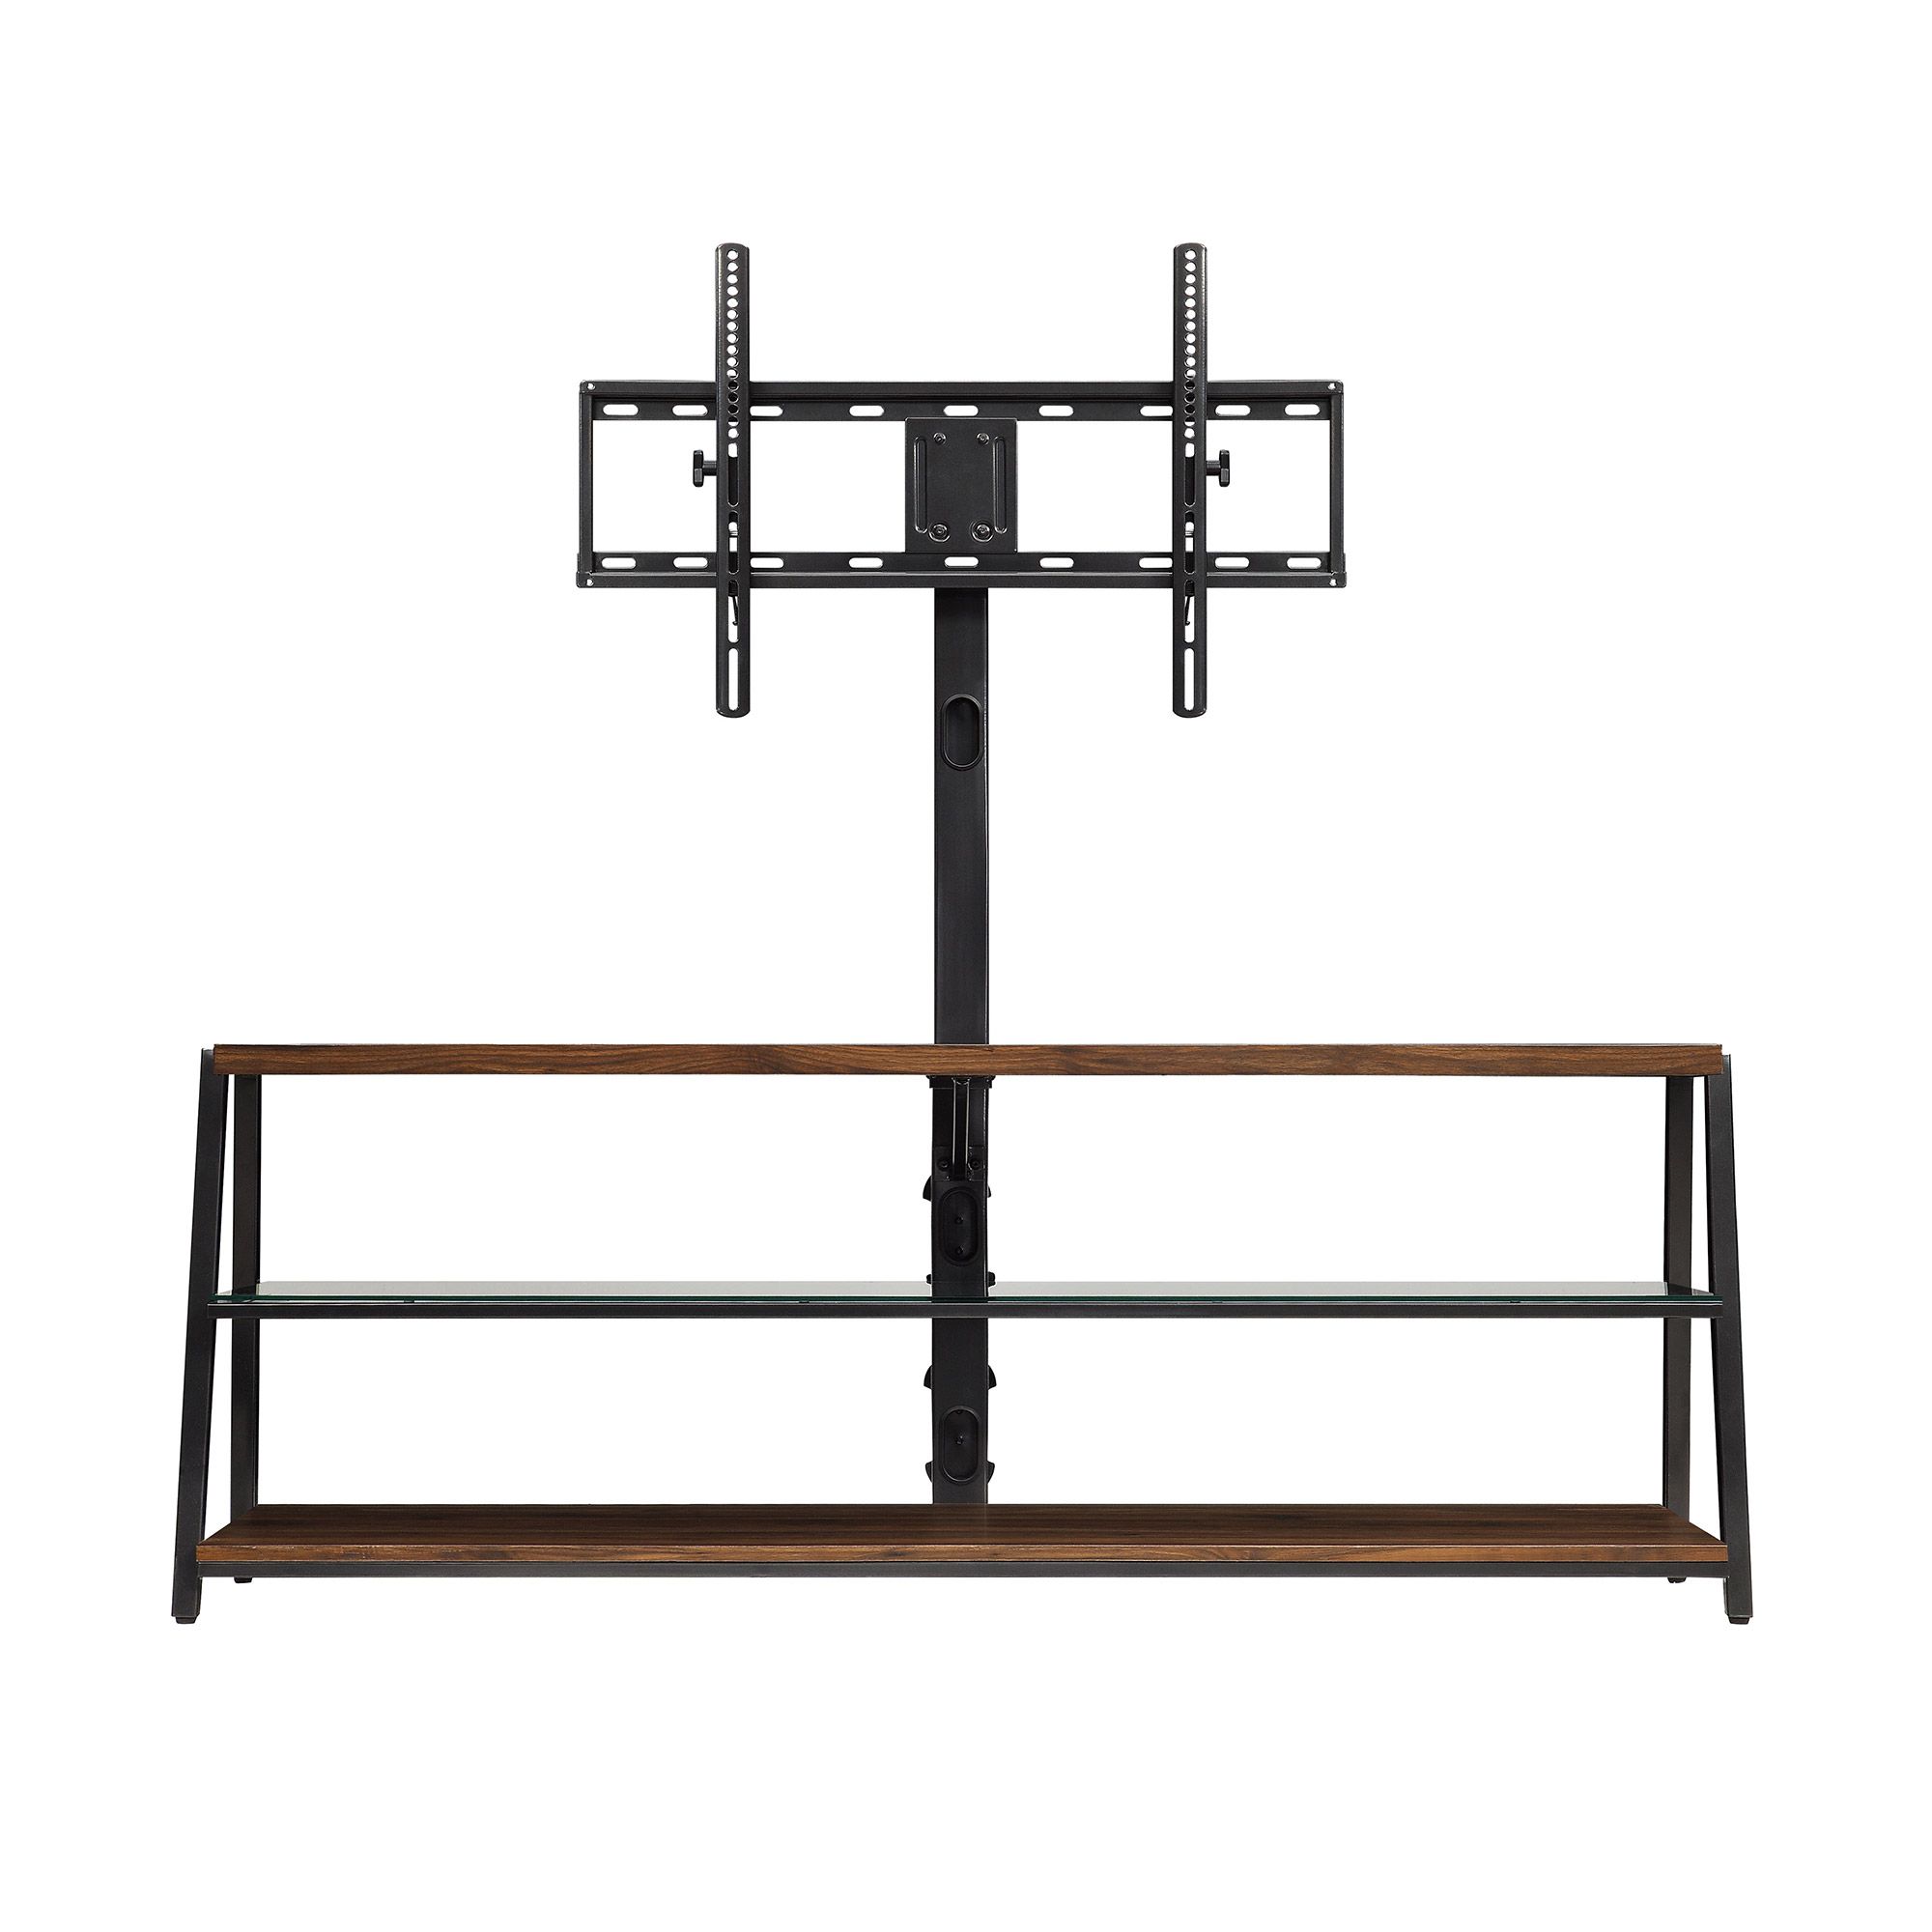 Mainstays Arris 3 In 1 Tv Stand For Televisions Up To 70 With Mainstays Arris 3 In 1 Tv Stands In Canyon Walnut Finish (Gallery 7 of 20)